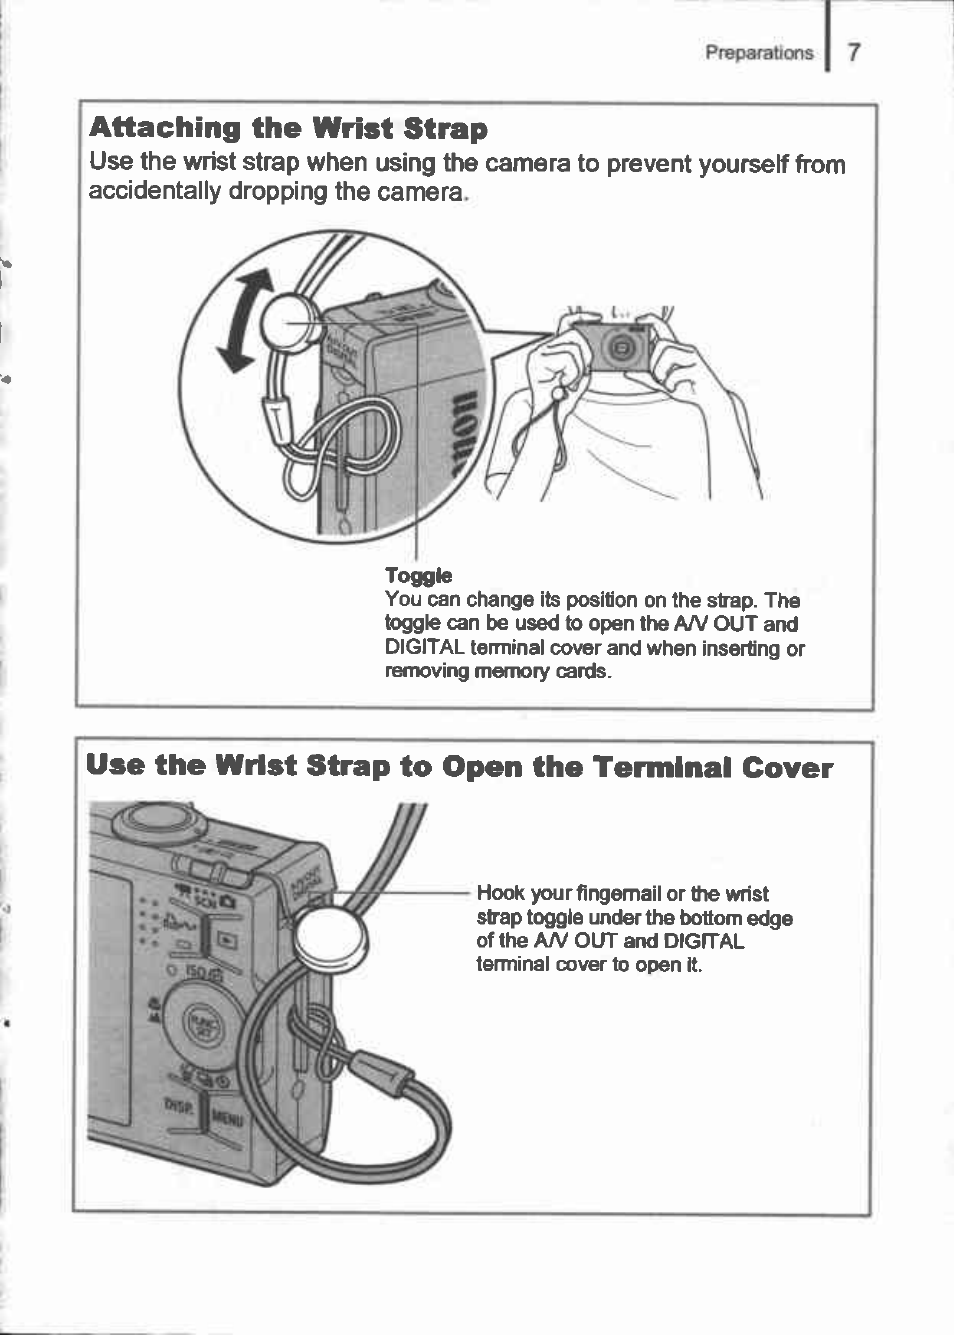 Attaching the wrist strap, Use the wrist strap to open the terminal cover | Canon IXUS 90IS User Manual | Page 9 / 36